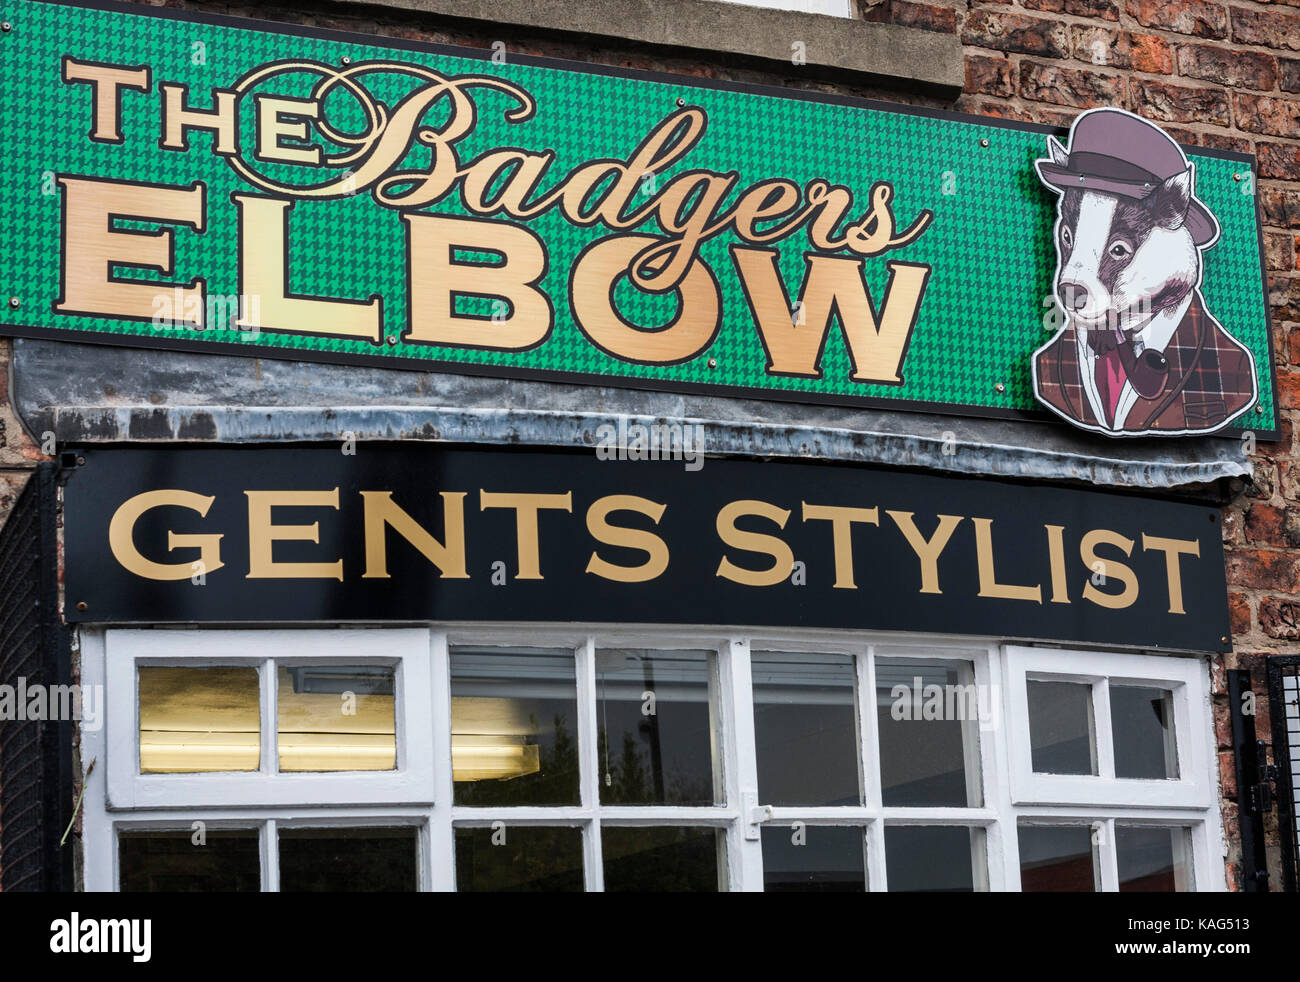 The Badgers Elbow, Gents Stylists, at Norton, Stockton on Tees, England, UK Stock Photo